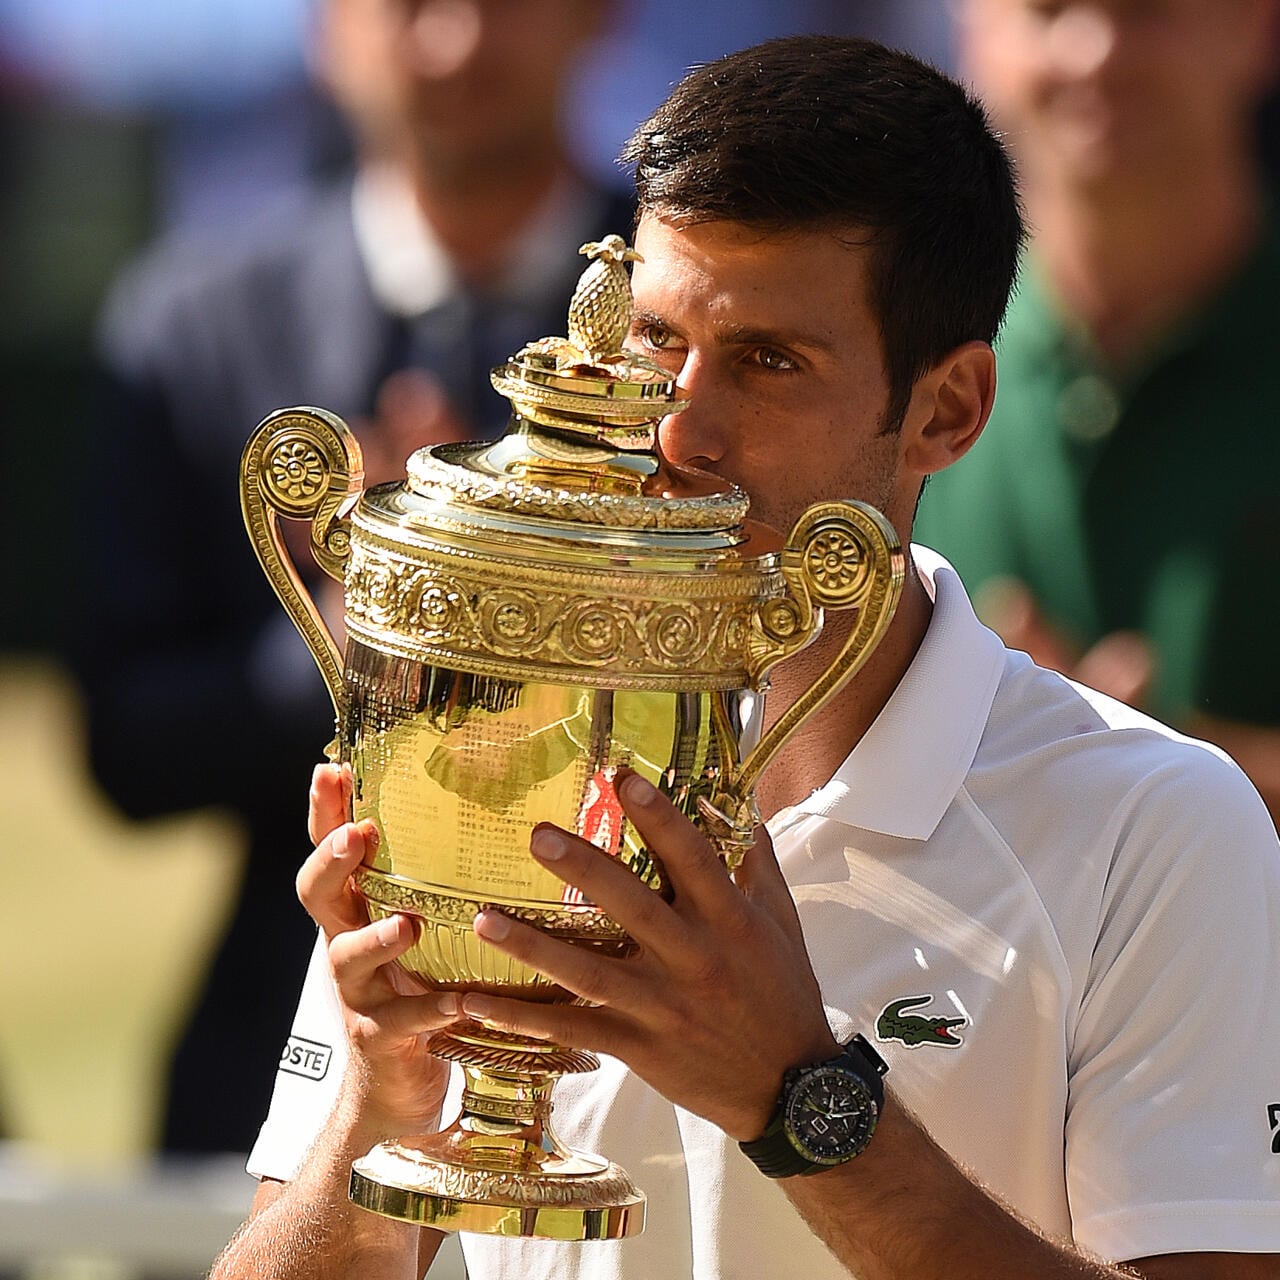 Serbia's Novak Djokovic kisses the winners the trophy after beating South Africa's Kevin Anderson 6-2, 6-2, 7-6 in their men's singles final match on the thirteenth day of the 2018 Wimbledon Championships at The All England Lawn Tennis Club in Wimbledon, southwest London, on July 15, 2018. / AFP PHOTO / Oli SCARFF / RESTRICTED TO EDITORIAL USE